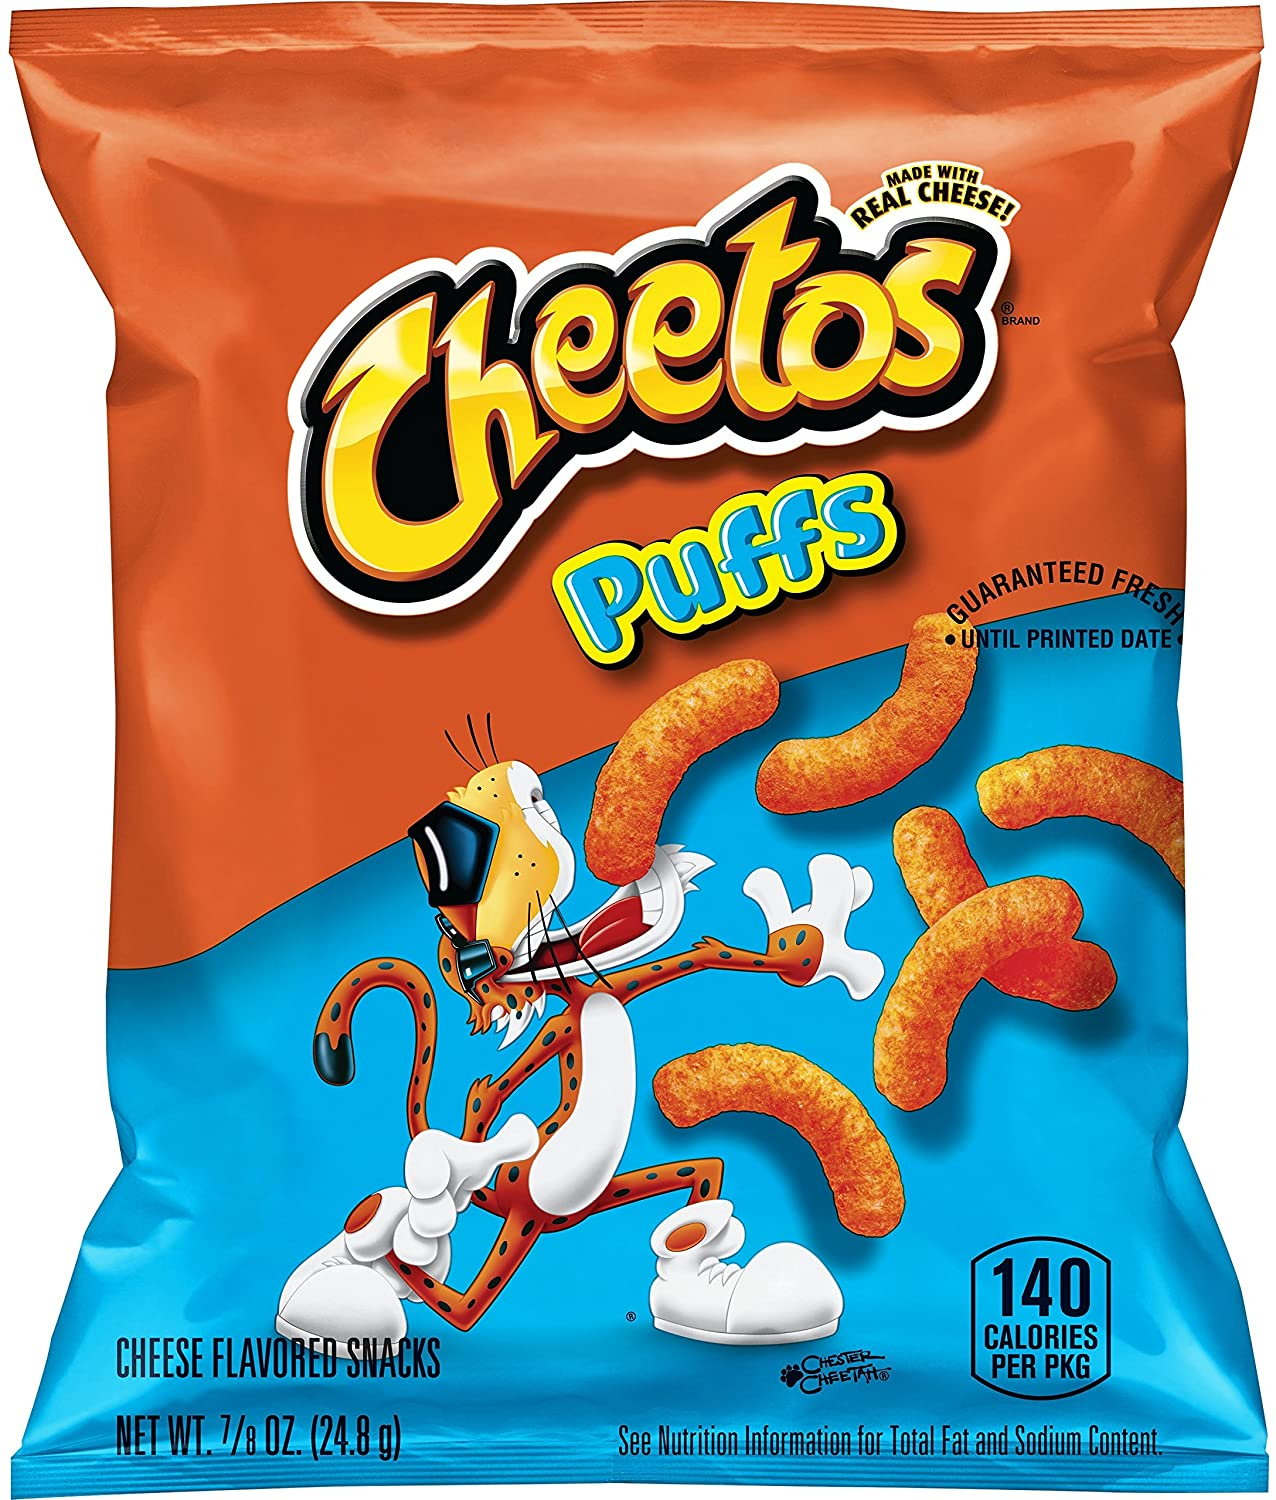 Amazon.com: Cheetos Puffs Cheese Flavored Snacks, 0.875 Ounce, Pack of 40 $11.98